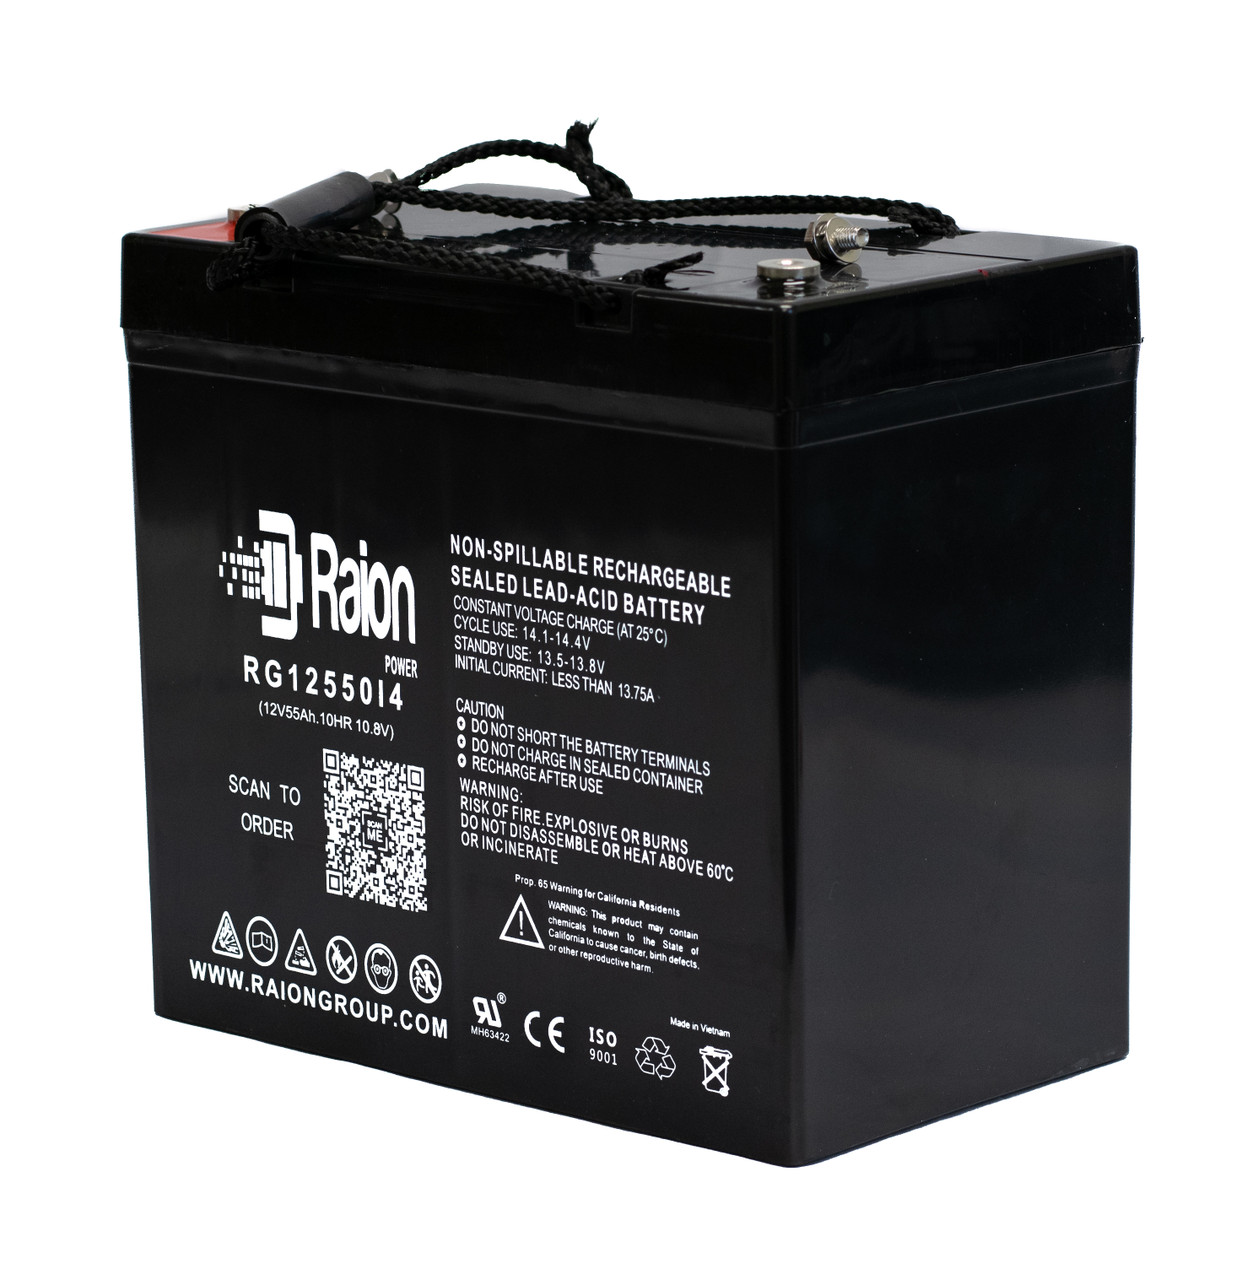 Raion Power 12V 55Ah 22NF Mobility Scooter Battery Replacement for Quickie Targa 18 Inch AGM